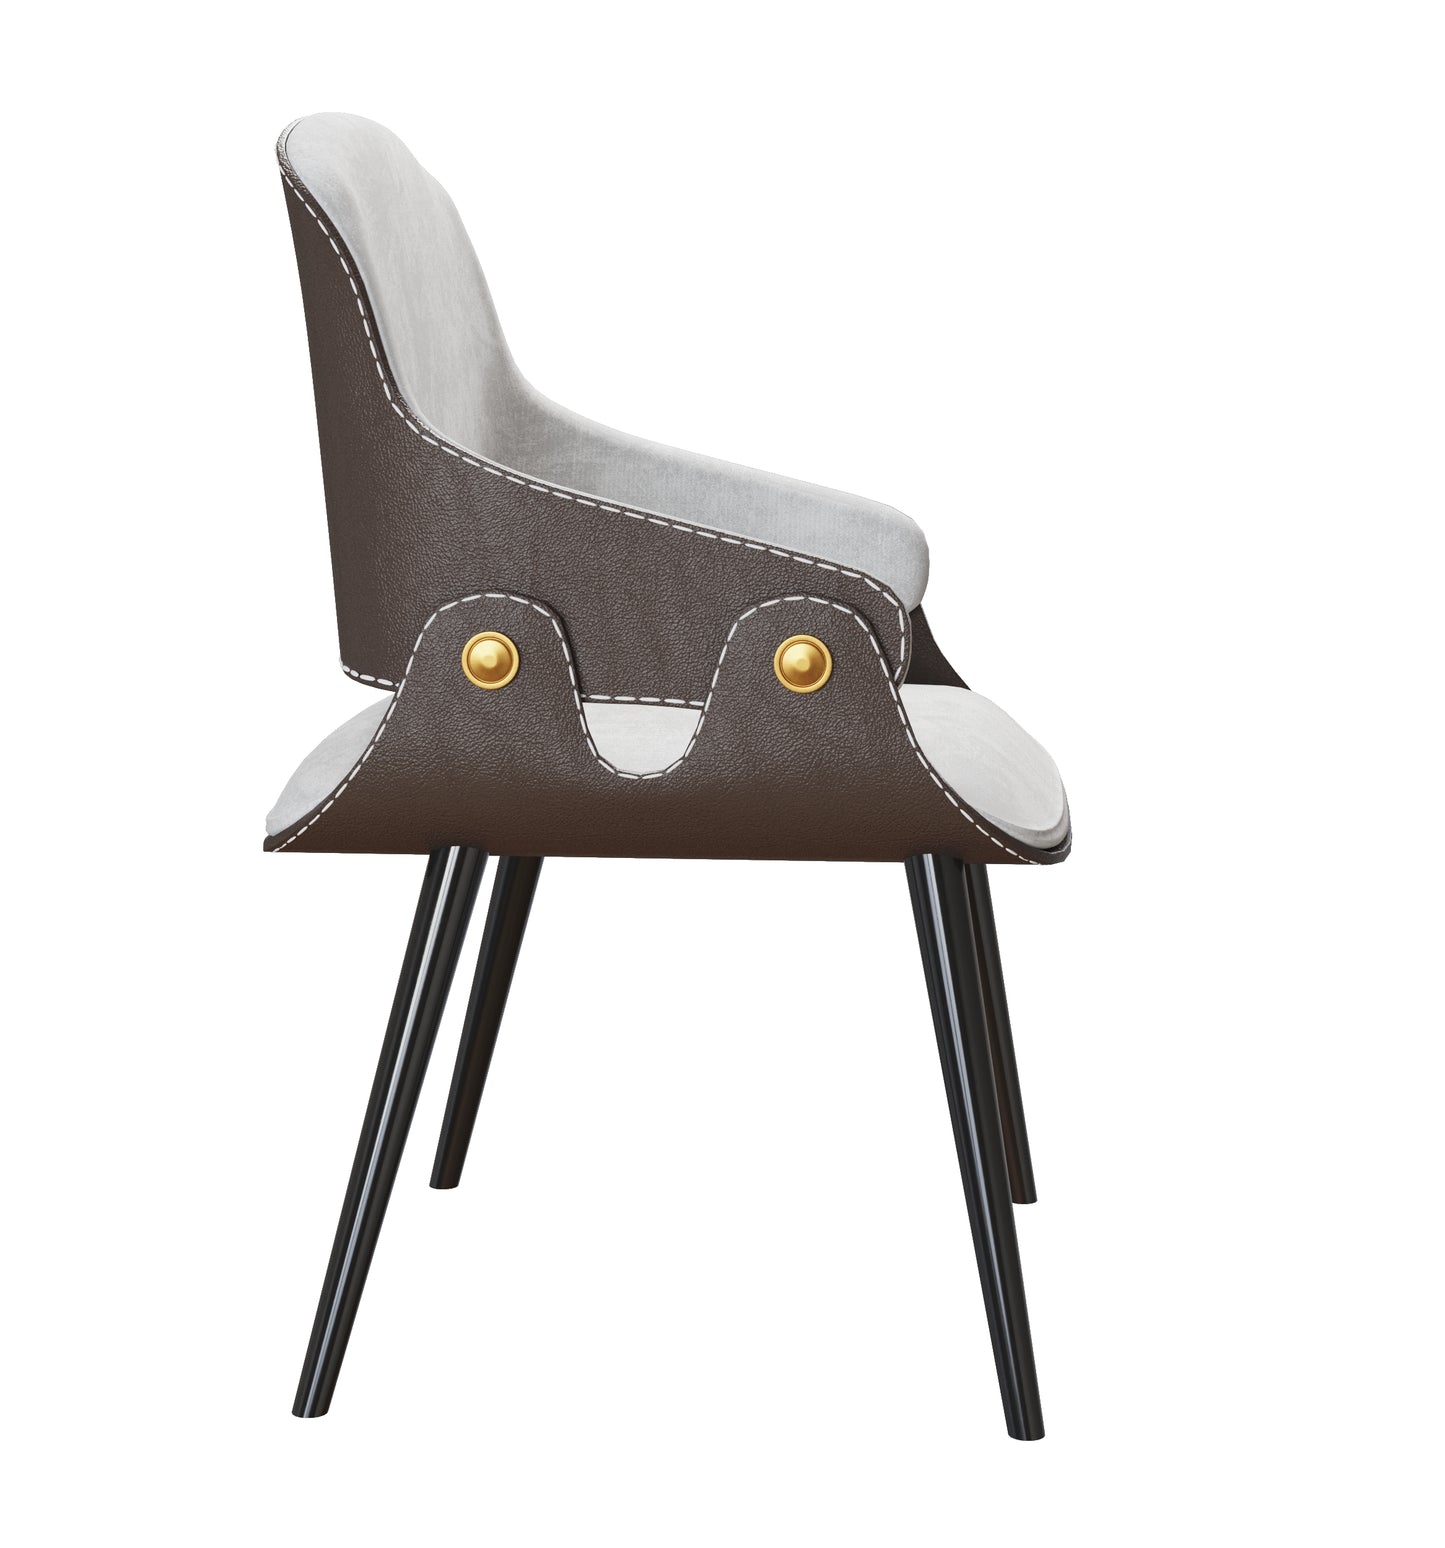 Nordic Artificial Leather Dining Chair